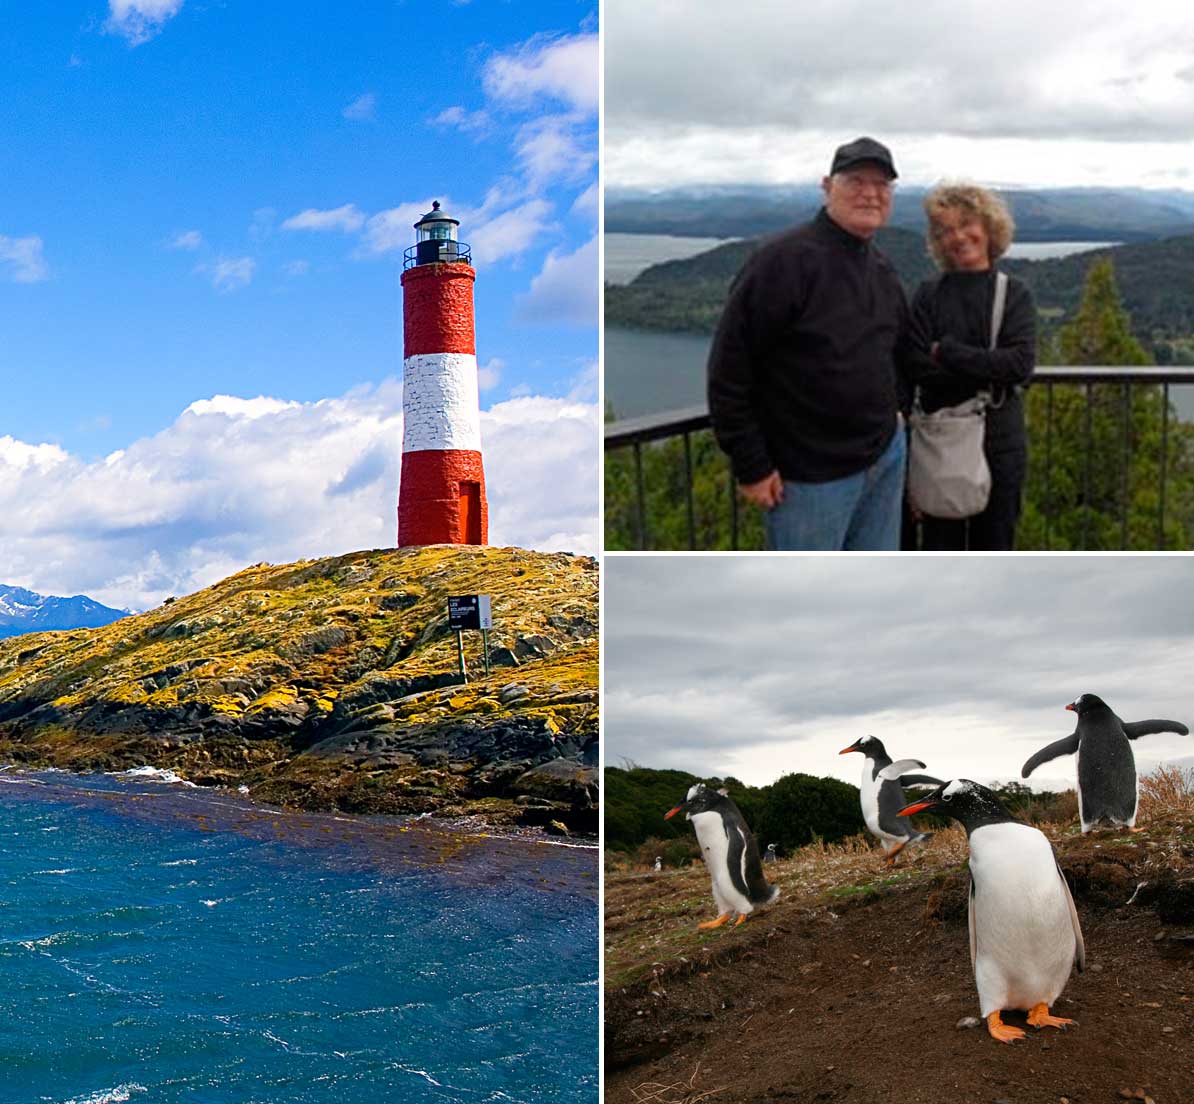  A collage showing a lighthouse, two visitors posing at a lookout point, and a group of penguins.